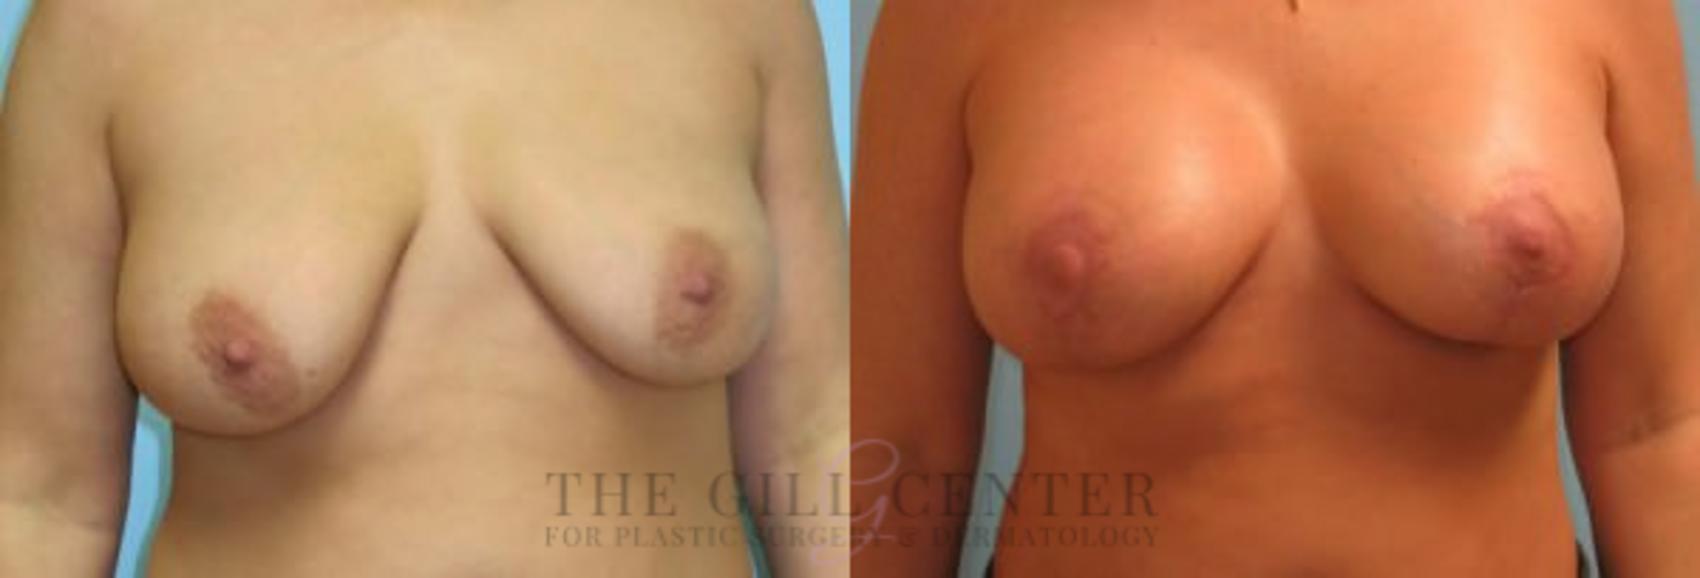 Breast Lift with Implants Case 120 Before & After Front | The Woodlands, TX | The Gill Center for Plastic Surgery and Dermatology